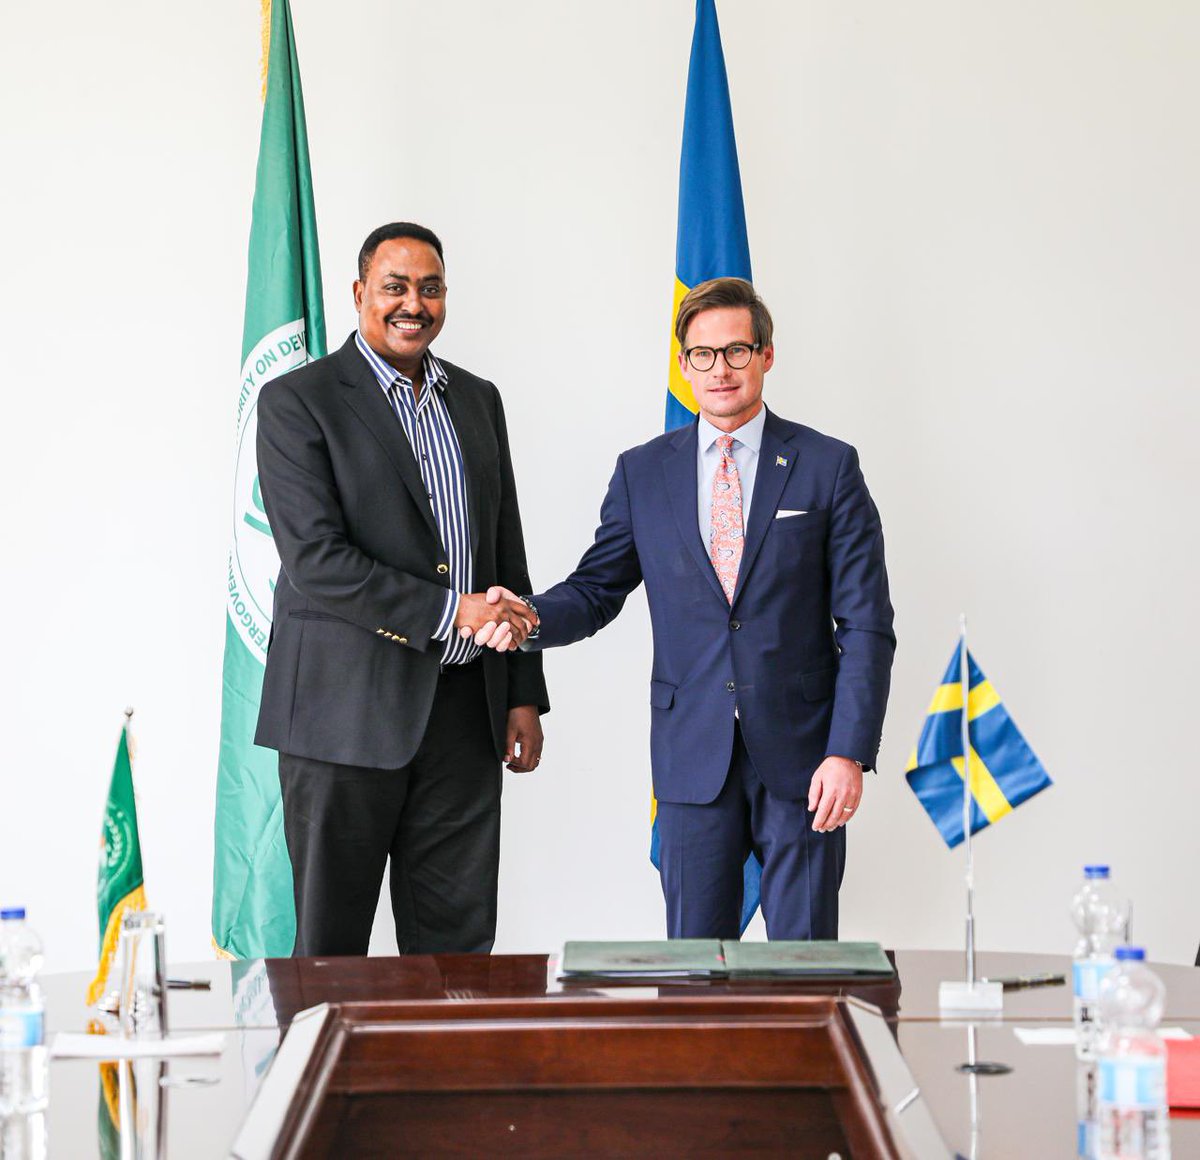 IGAD and Sweden join forces to boost protection and solutions for displaced persons in the region fanabc.com/english/igad-s…